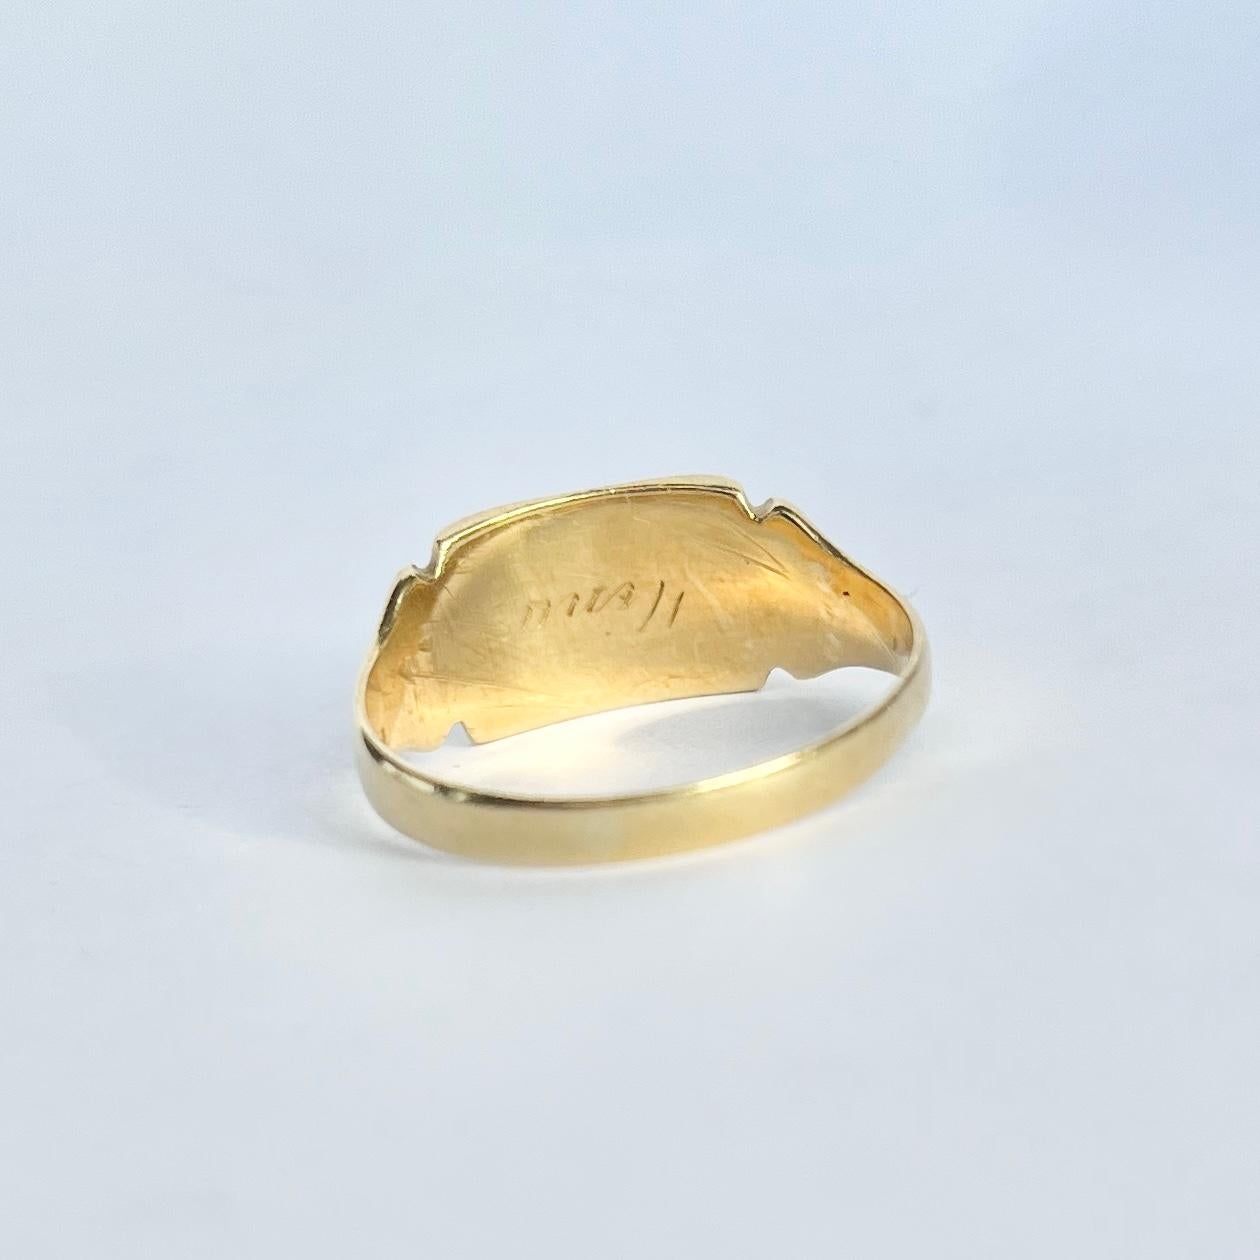 Vintage 18 Carat Gold Signet Ring In Good Condition For Sale In Chipping Campden, GB